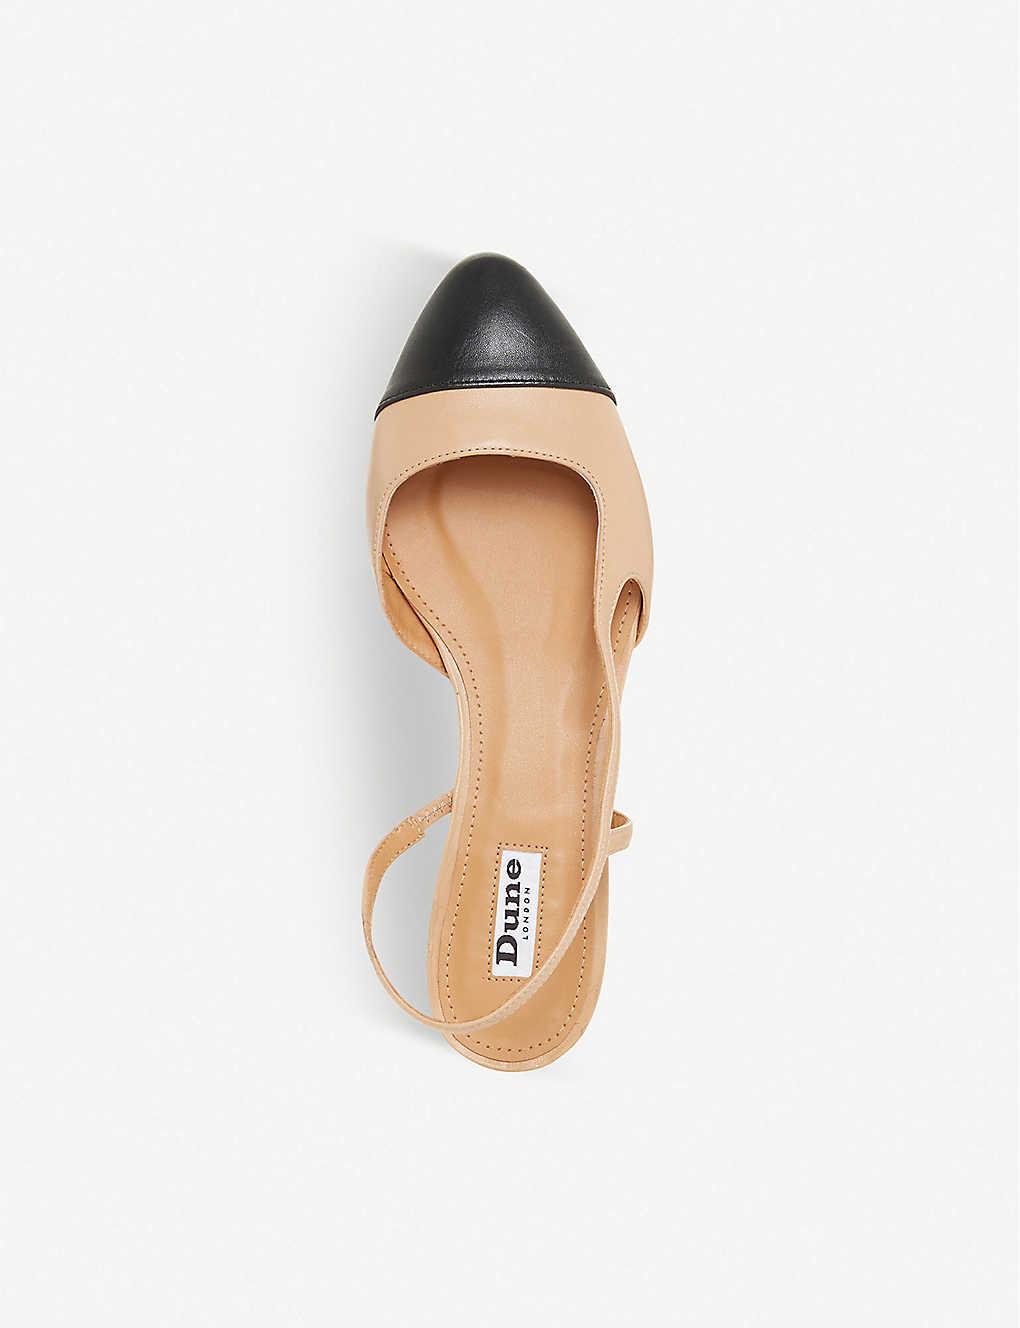 Dune Coralina Slingback Leather Shoes in Natural | Lyst